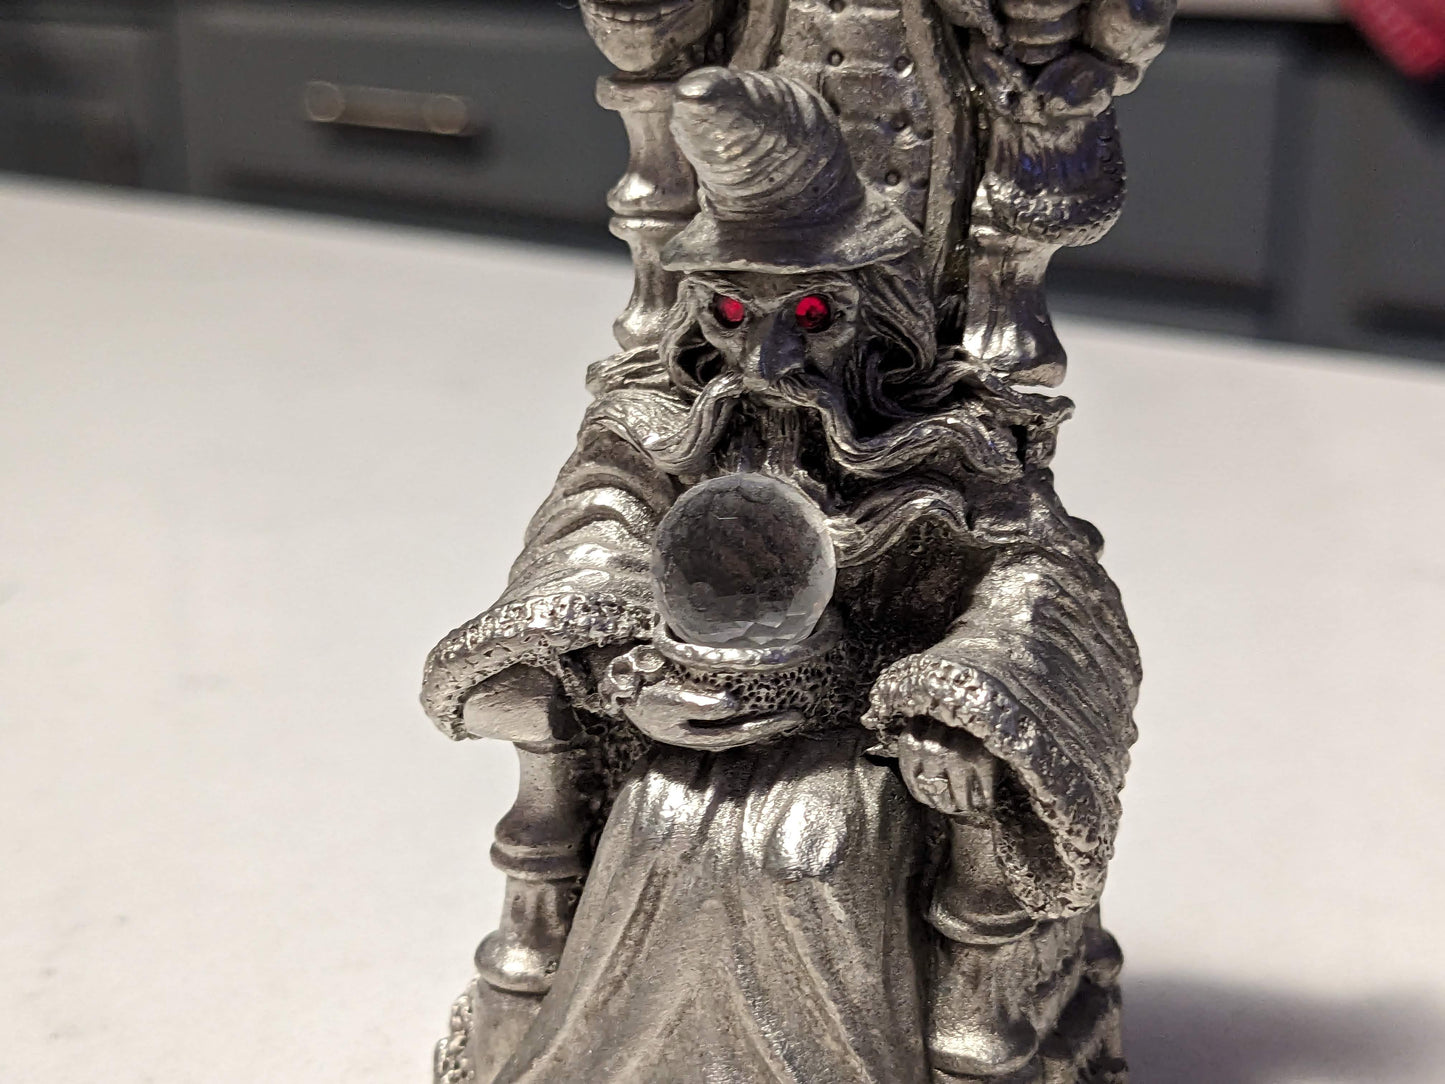 Red Eye Wizard with Crystal Ball, Dragon & Skull (Vintage Spoontiques Pewter Figurine MR965)